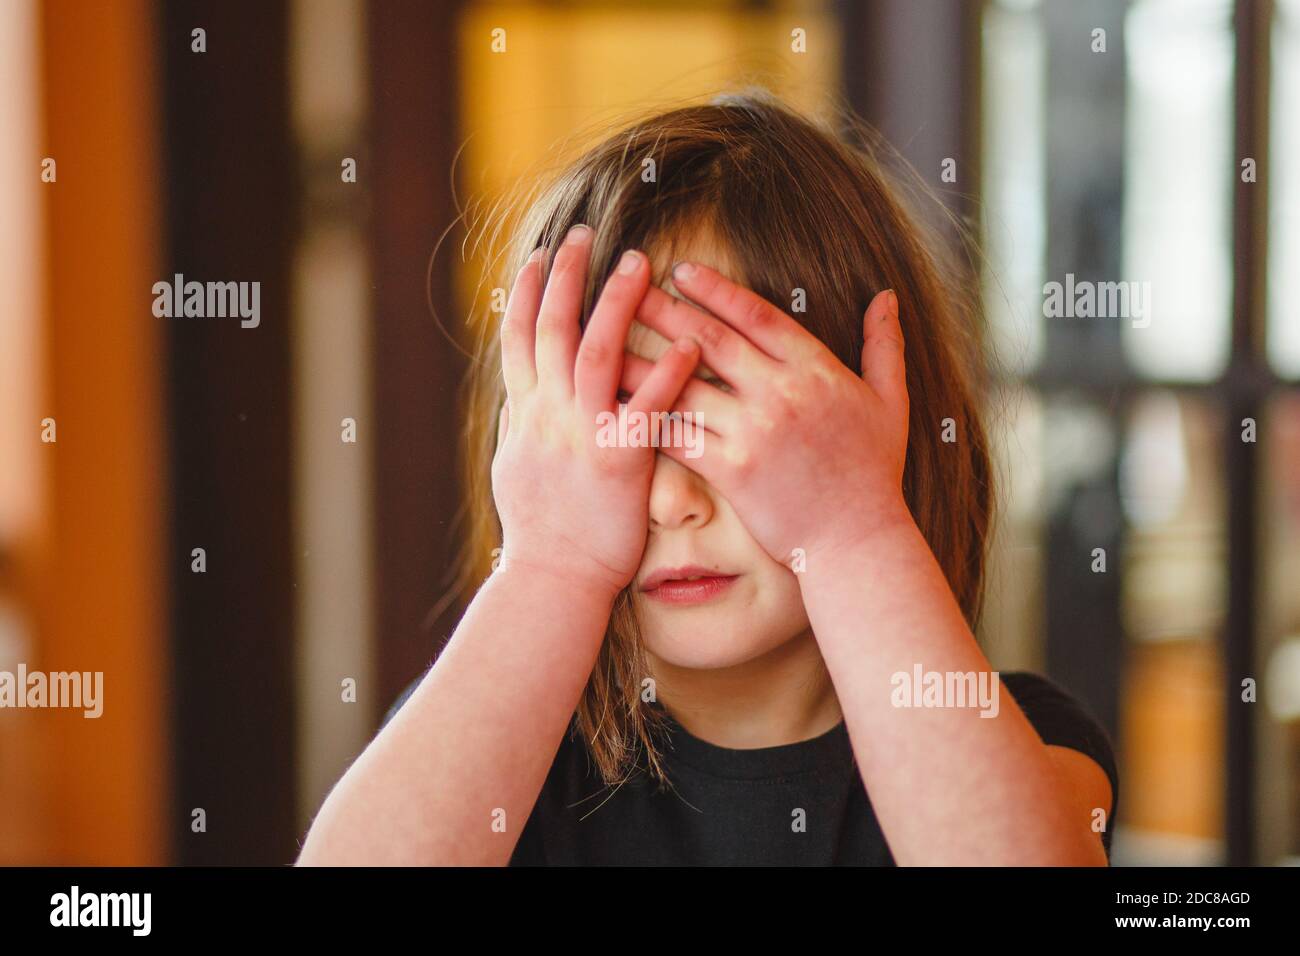 Close-up of a small child hiding behind her hands Stock Photo